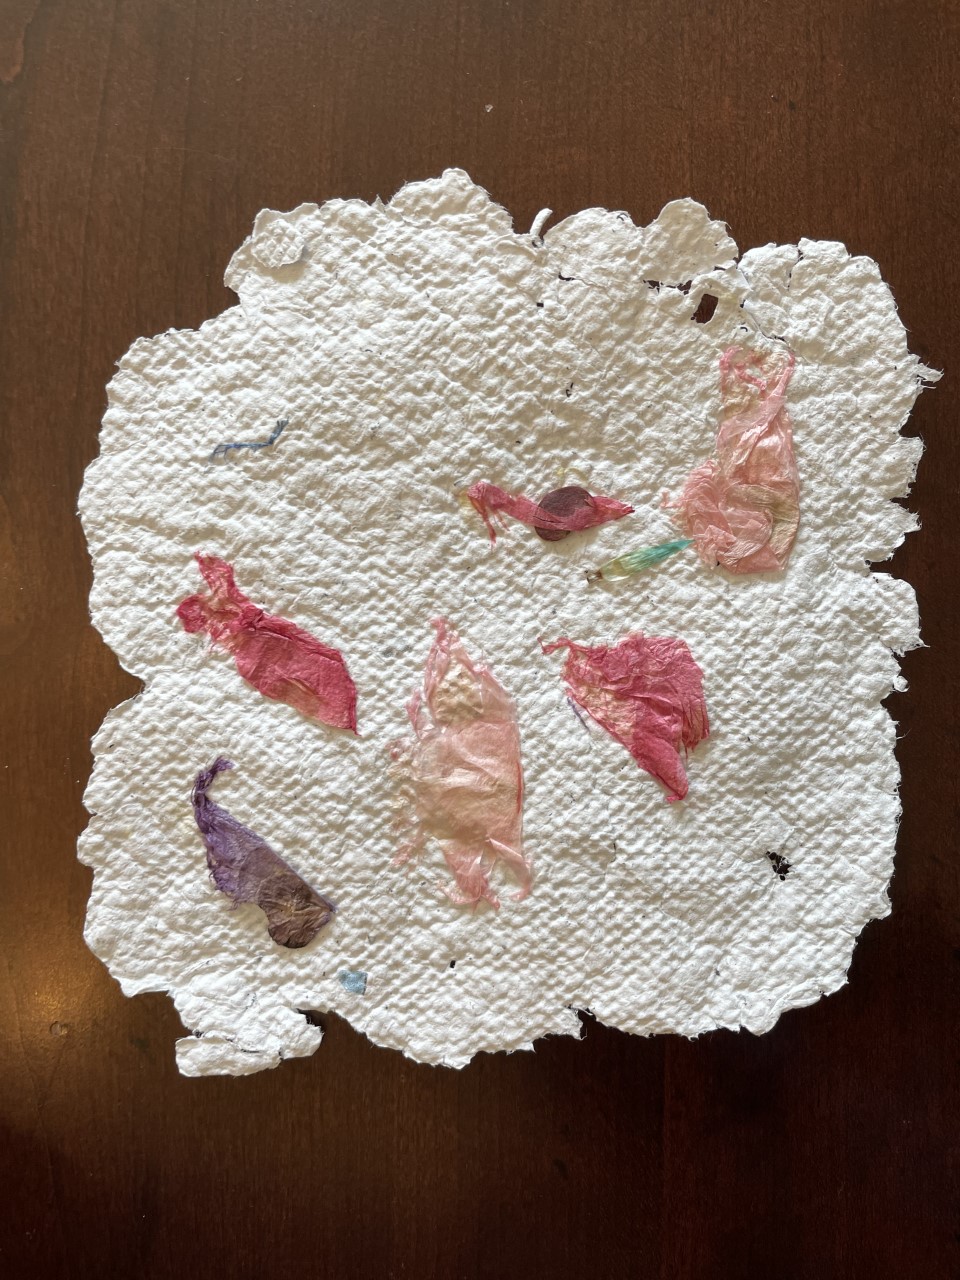 handmade textured paper in irregular shape and scattered with flower petals